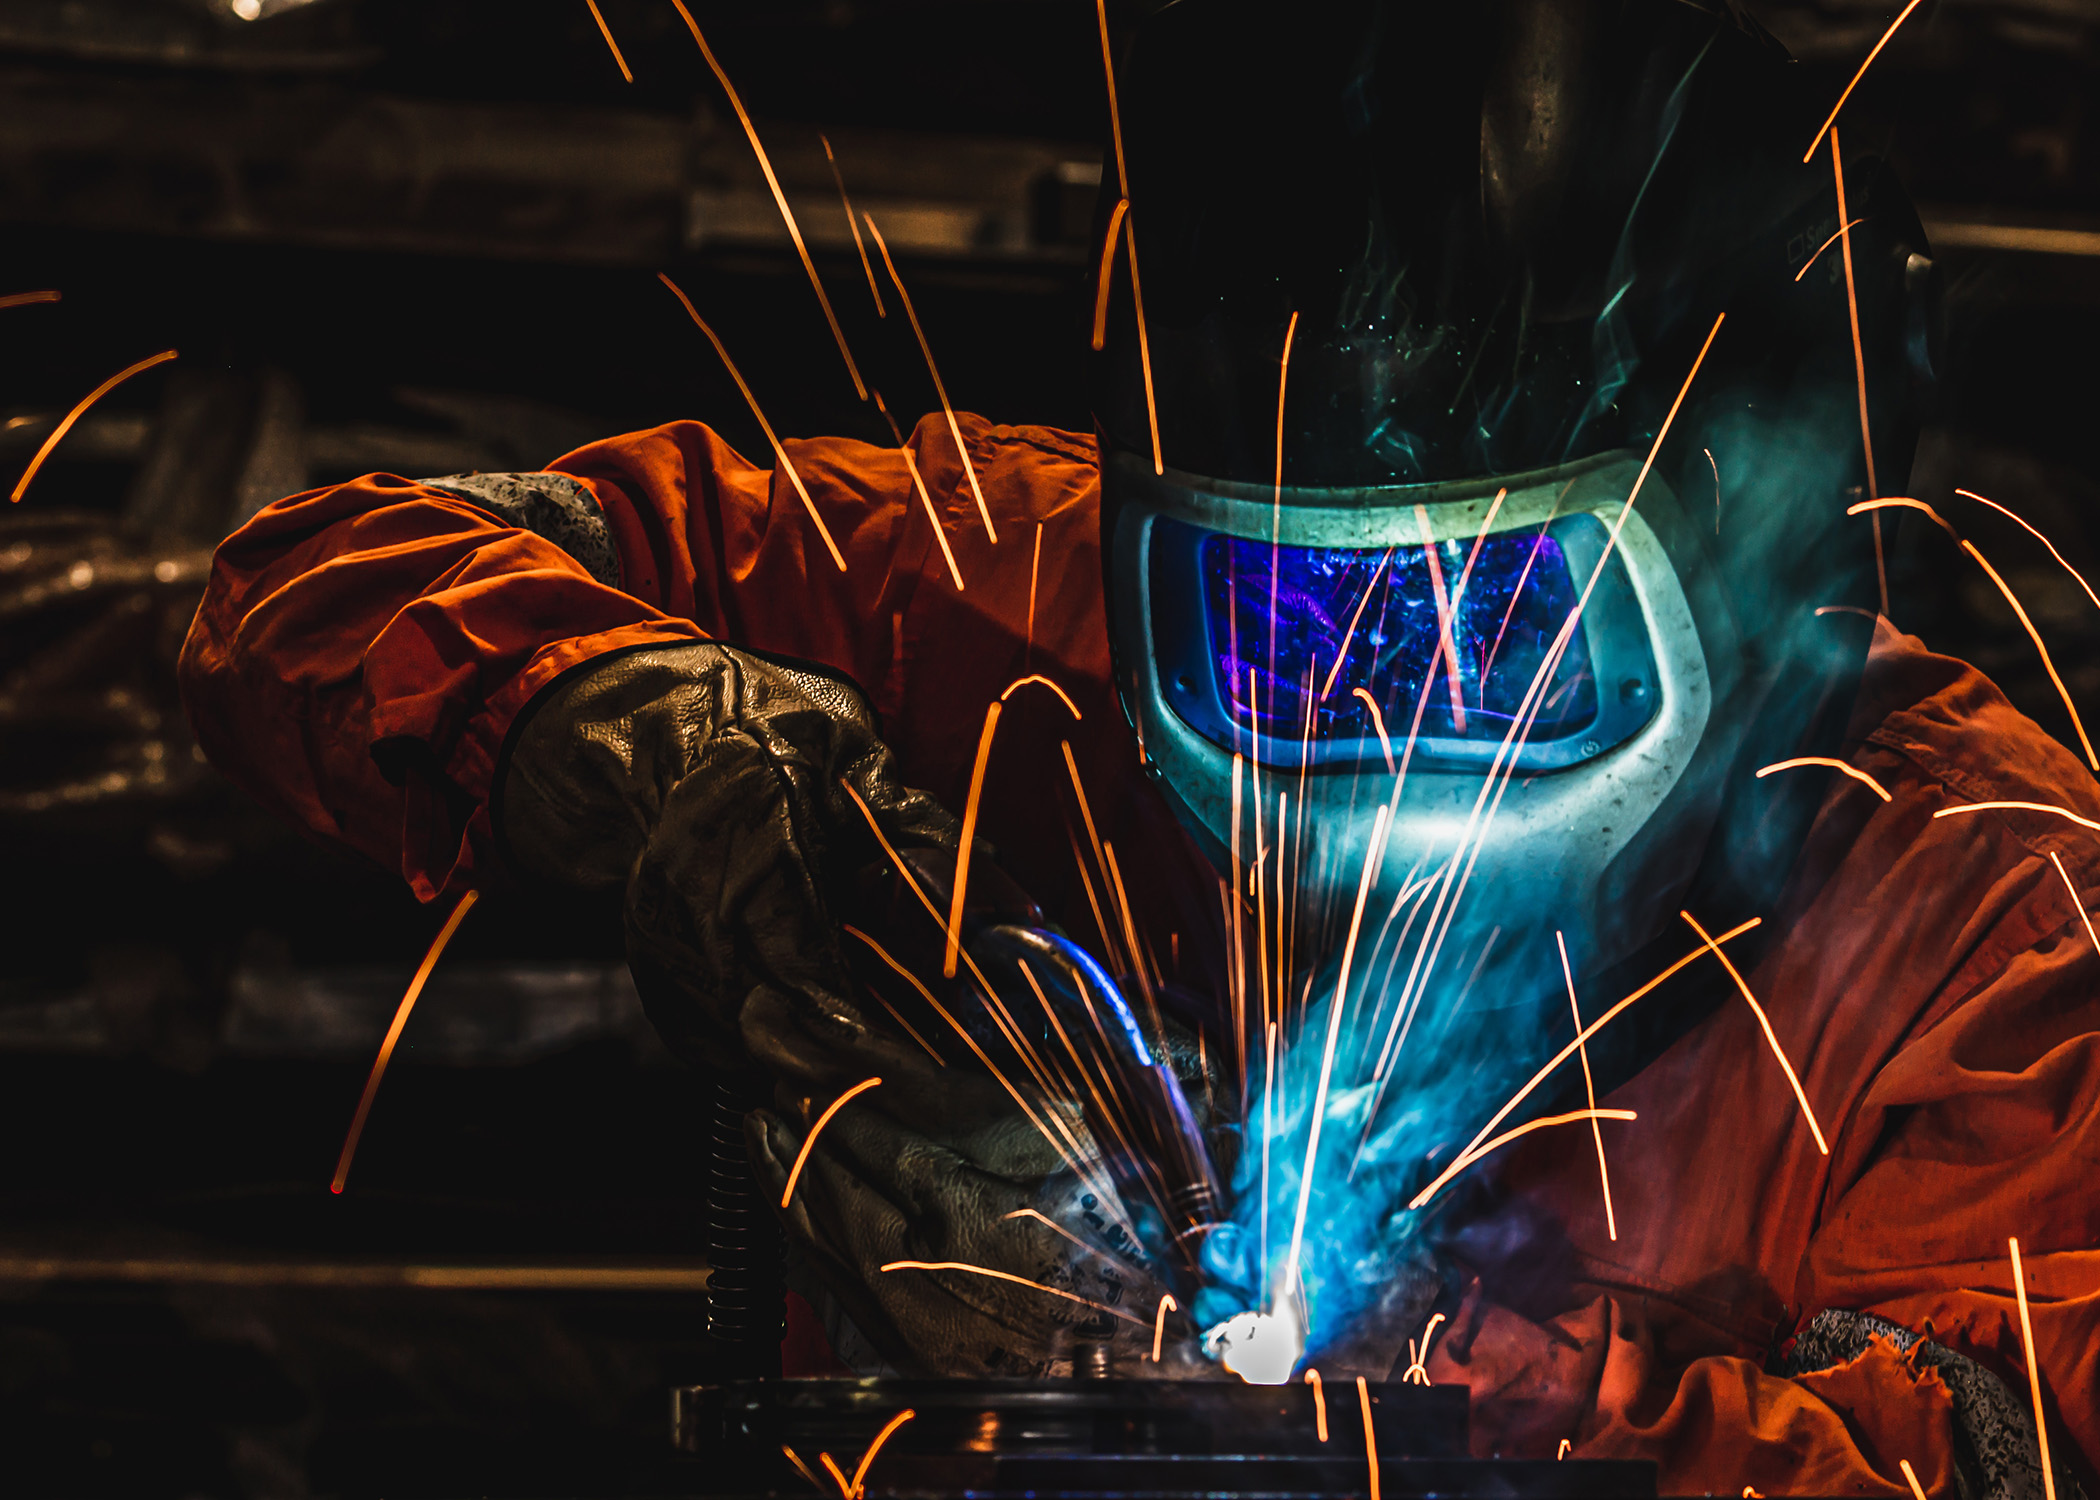 New Insights on Health Risks of Mild Steel Welding Fumes